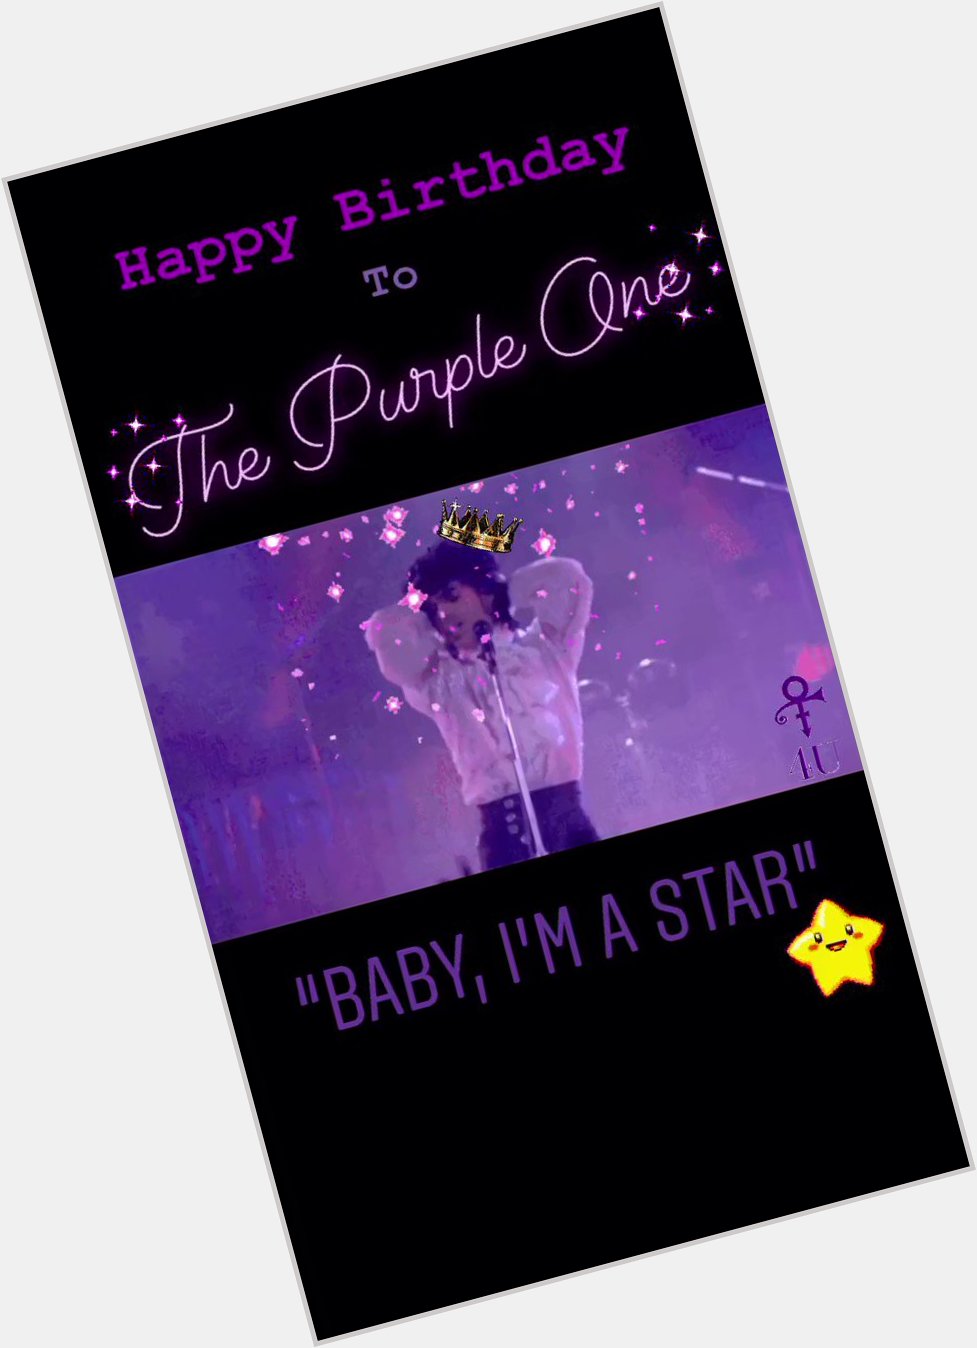 Prince means/meant so much to my family happy birthday to a legendary soul 